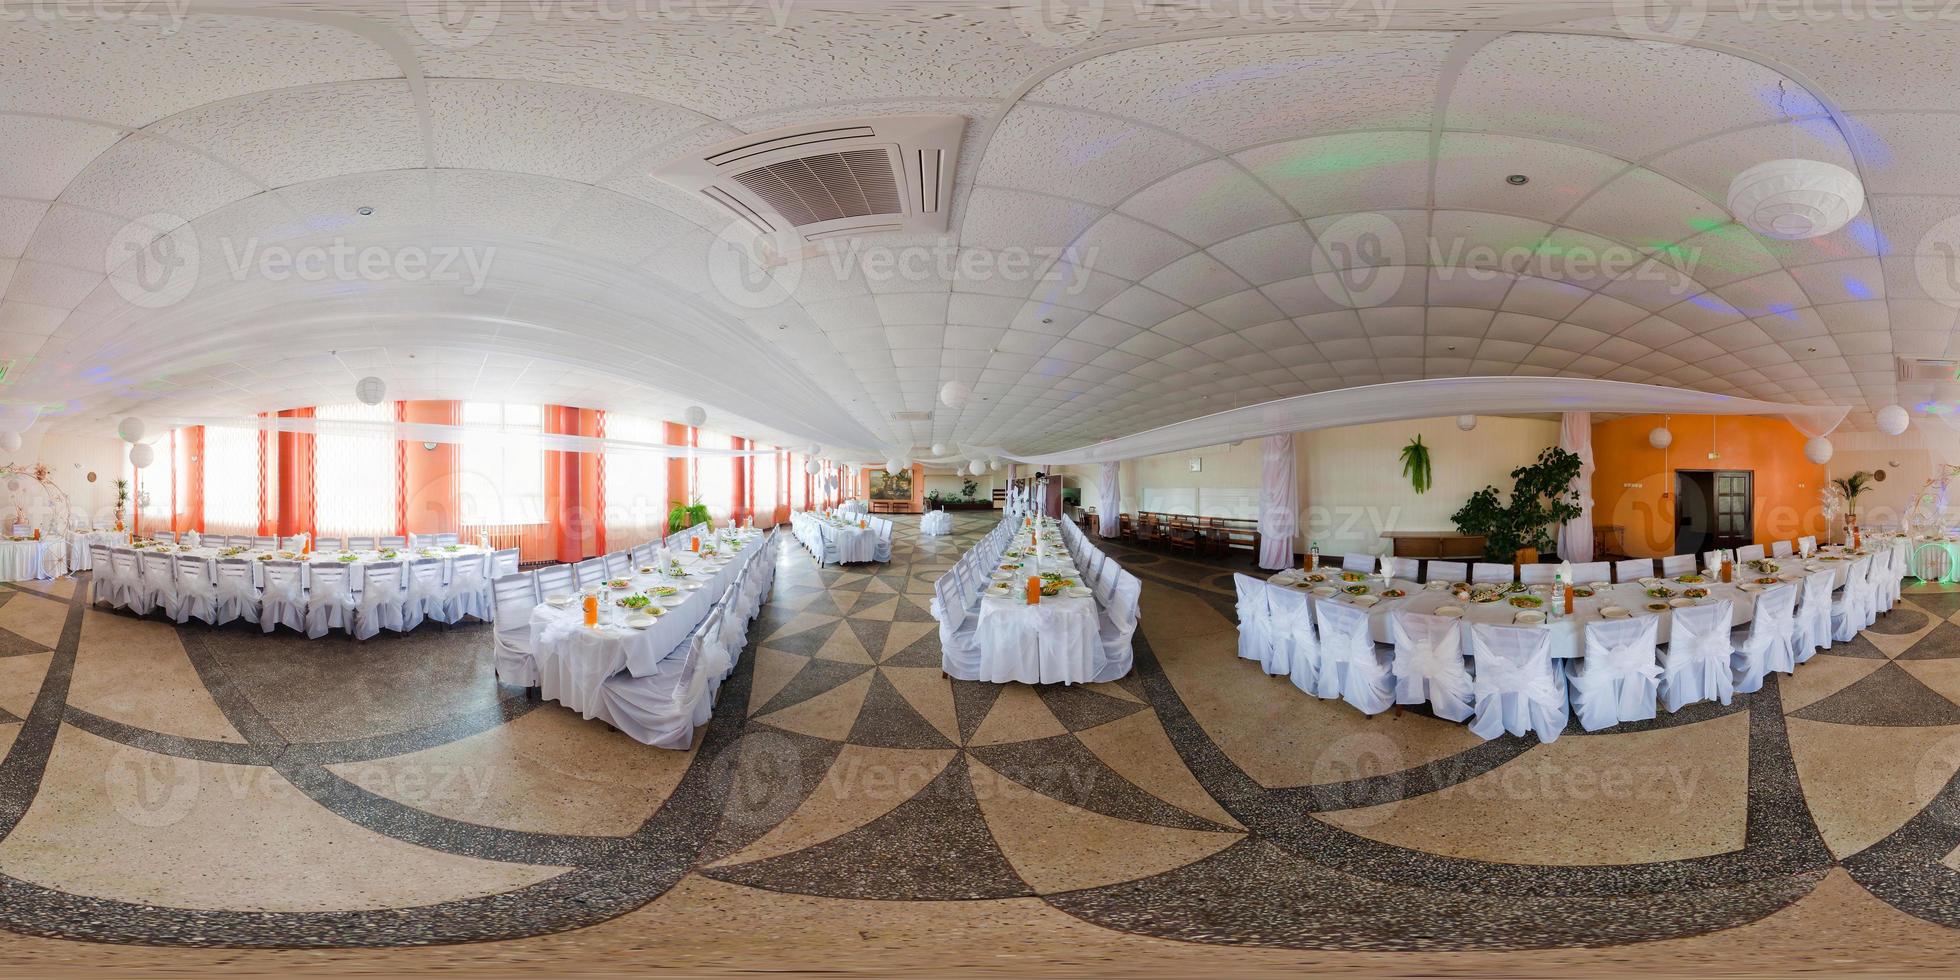 spherical hdr 360 panorama in interior of outdoor banquet hall with appliances in equirectangular projection. VR content photo